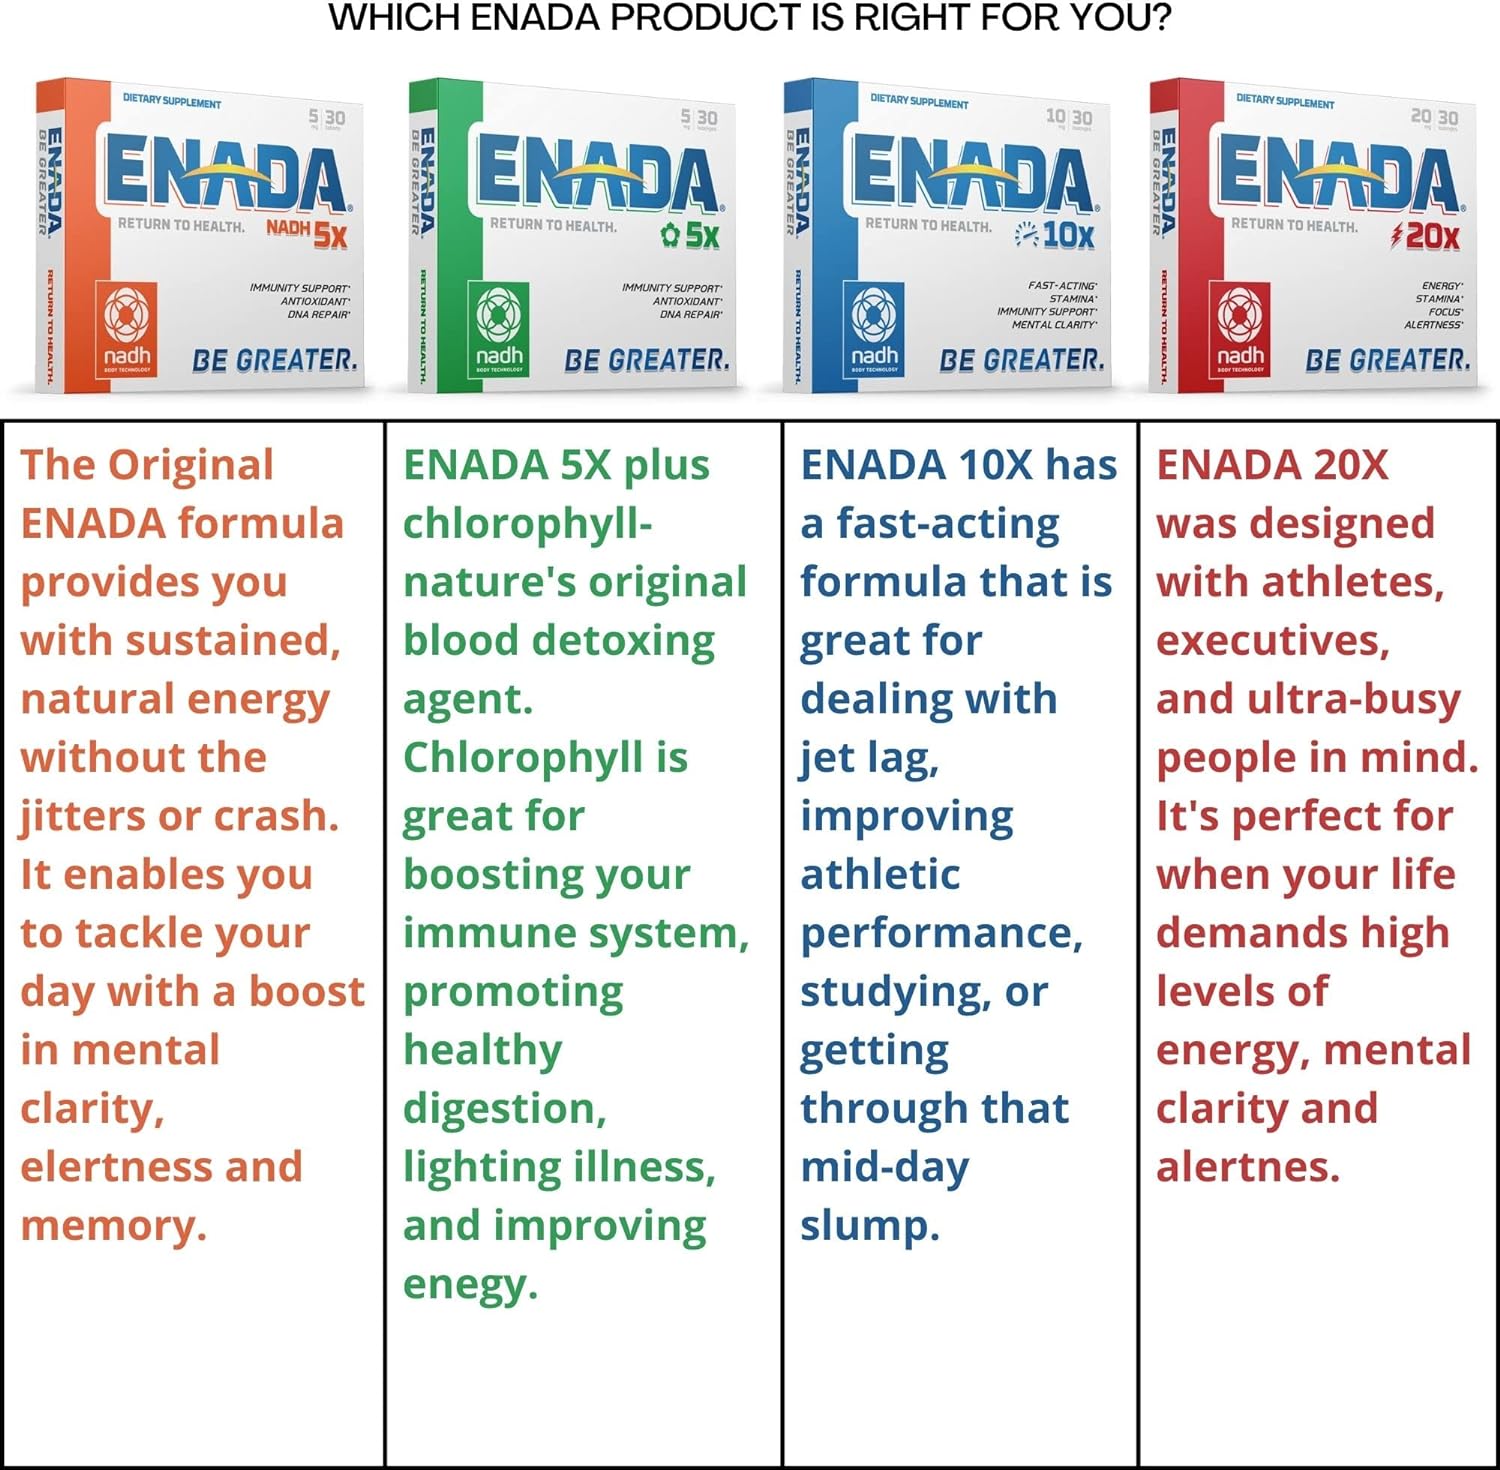 ENADA 5MG NADH Supplement with boost of Chlorophyll | Co-enzyme, Antioxidant form of Vitamin B3, Immunity Support, DNA Repair | Serves as Natural Energy, Memory Booster & Restore Body's Cellular Energy | 30 Tablets